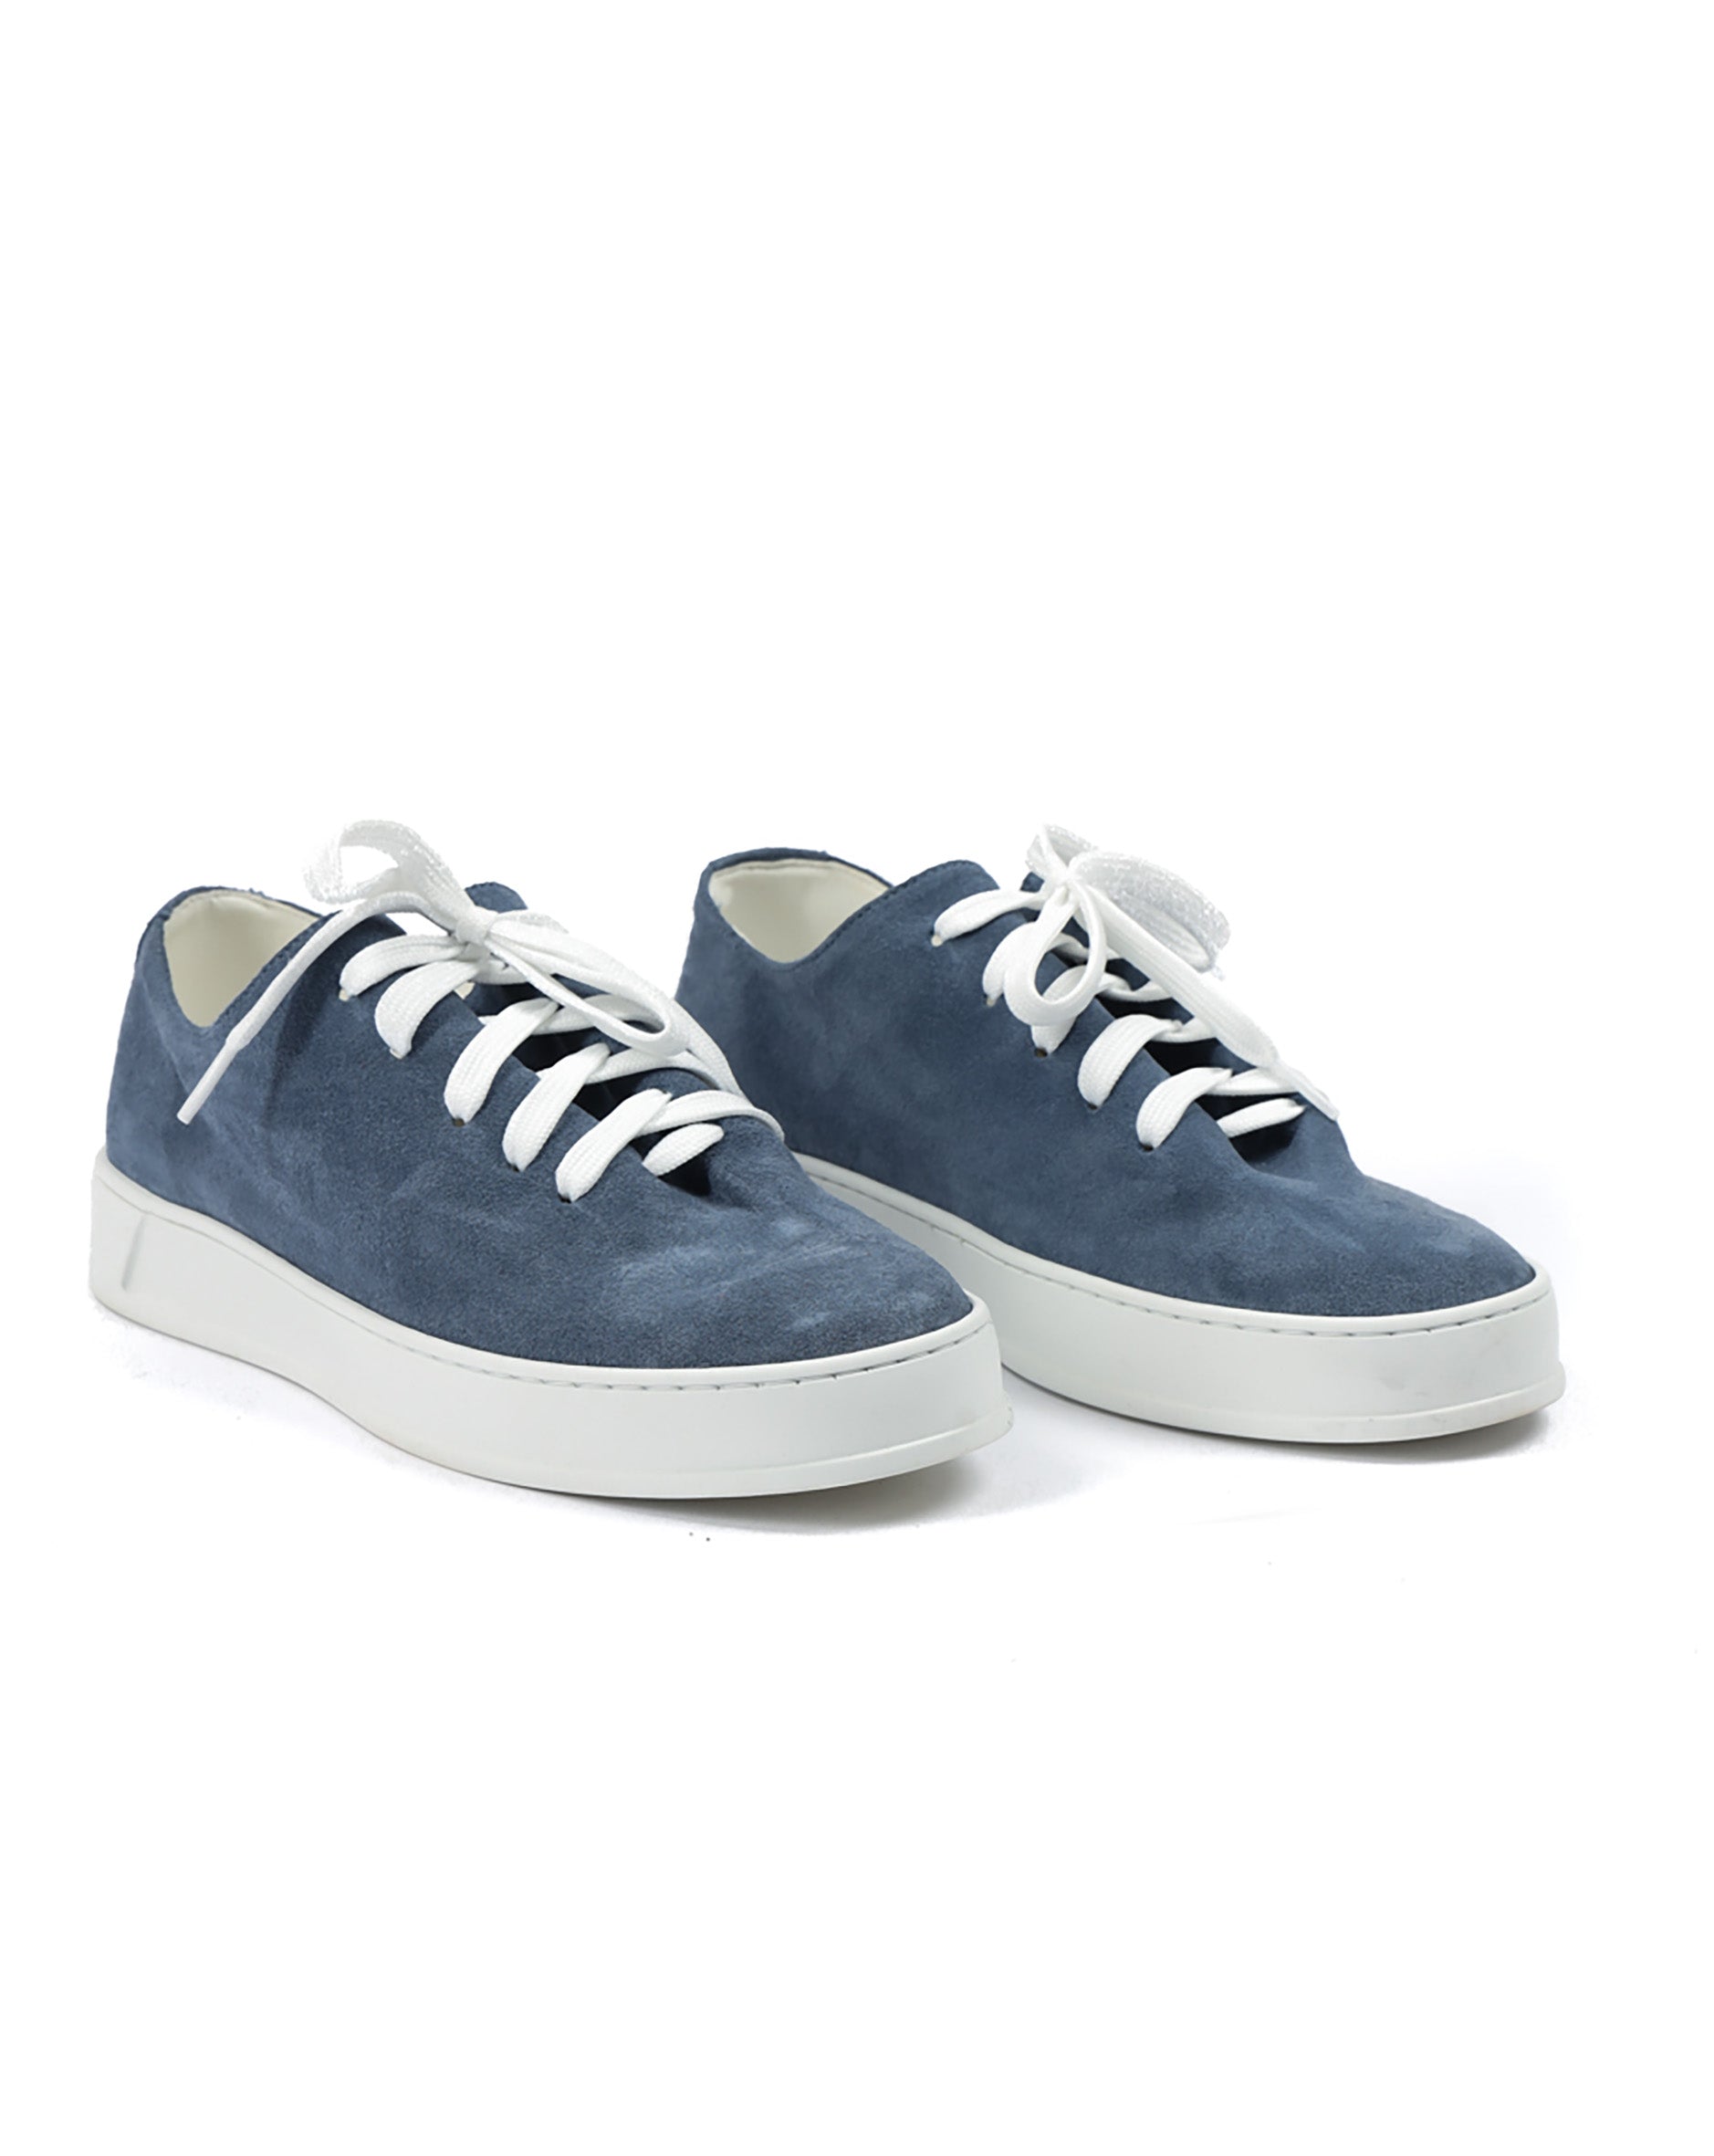 Steph - Sneakers scamosciata jeans